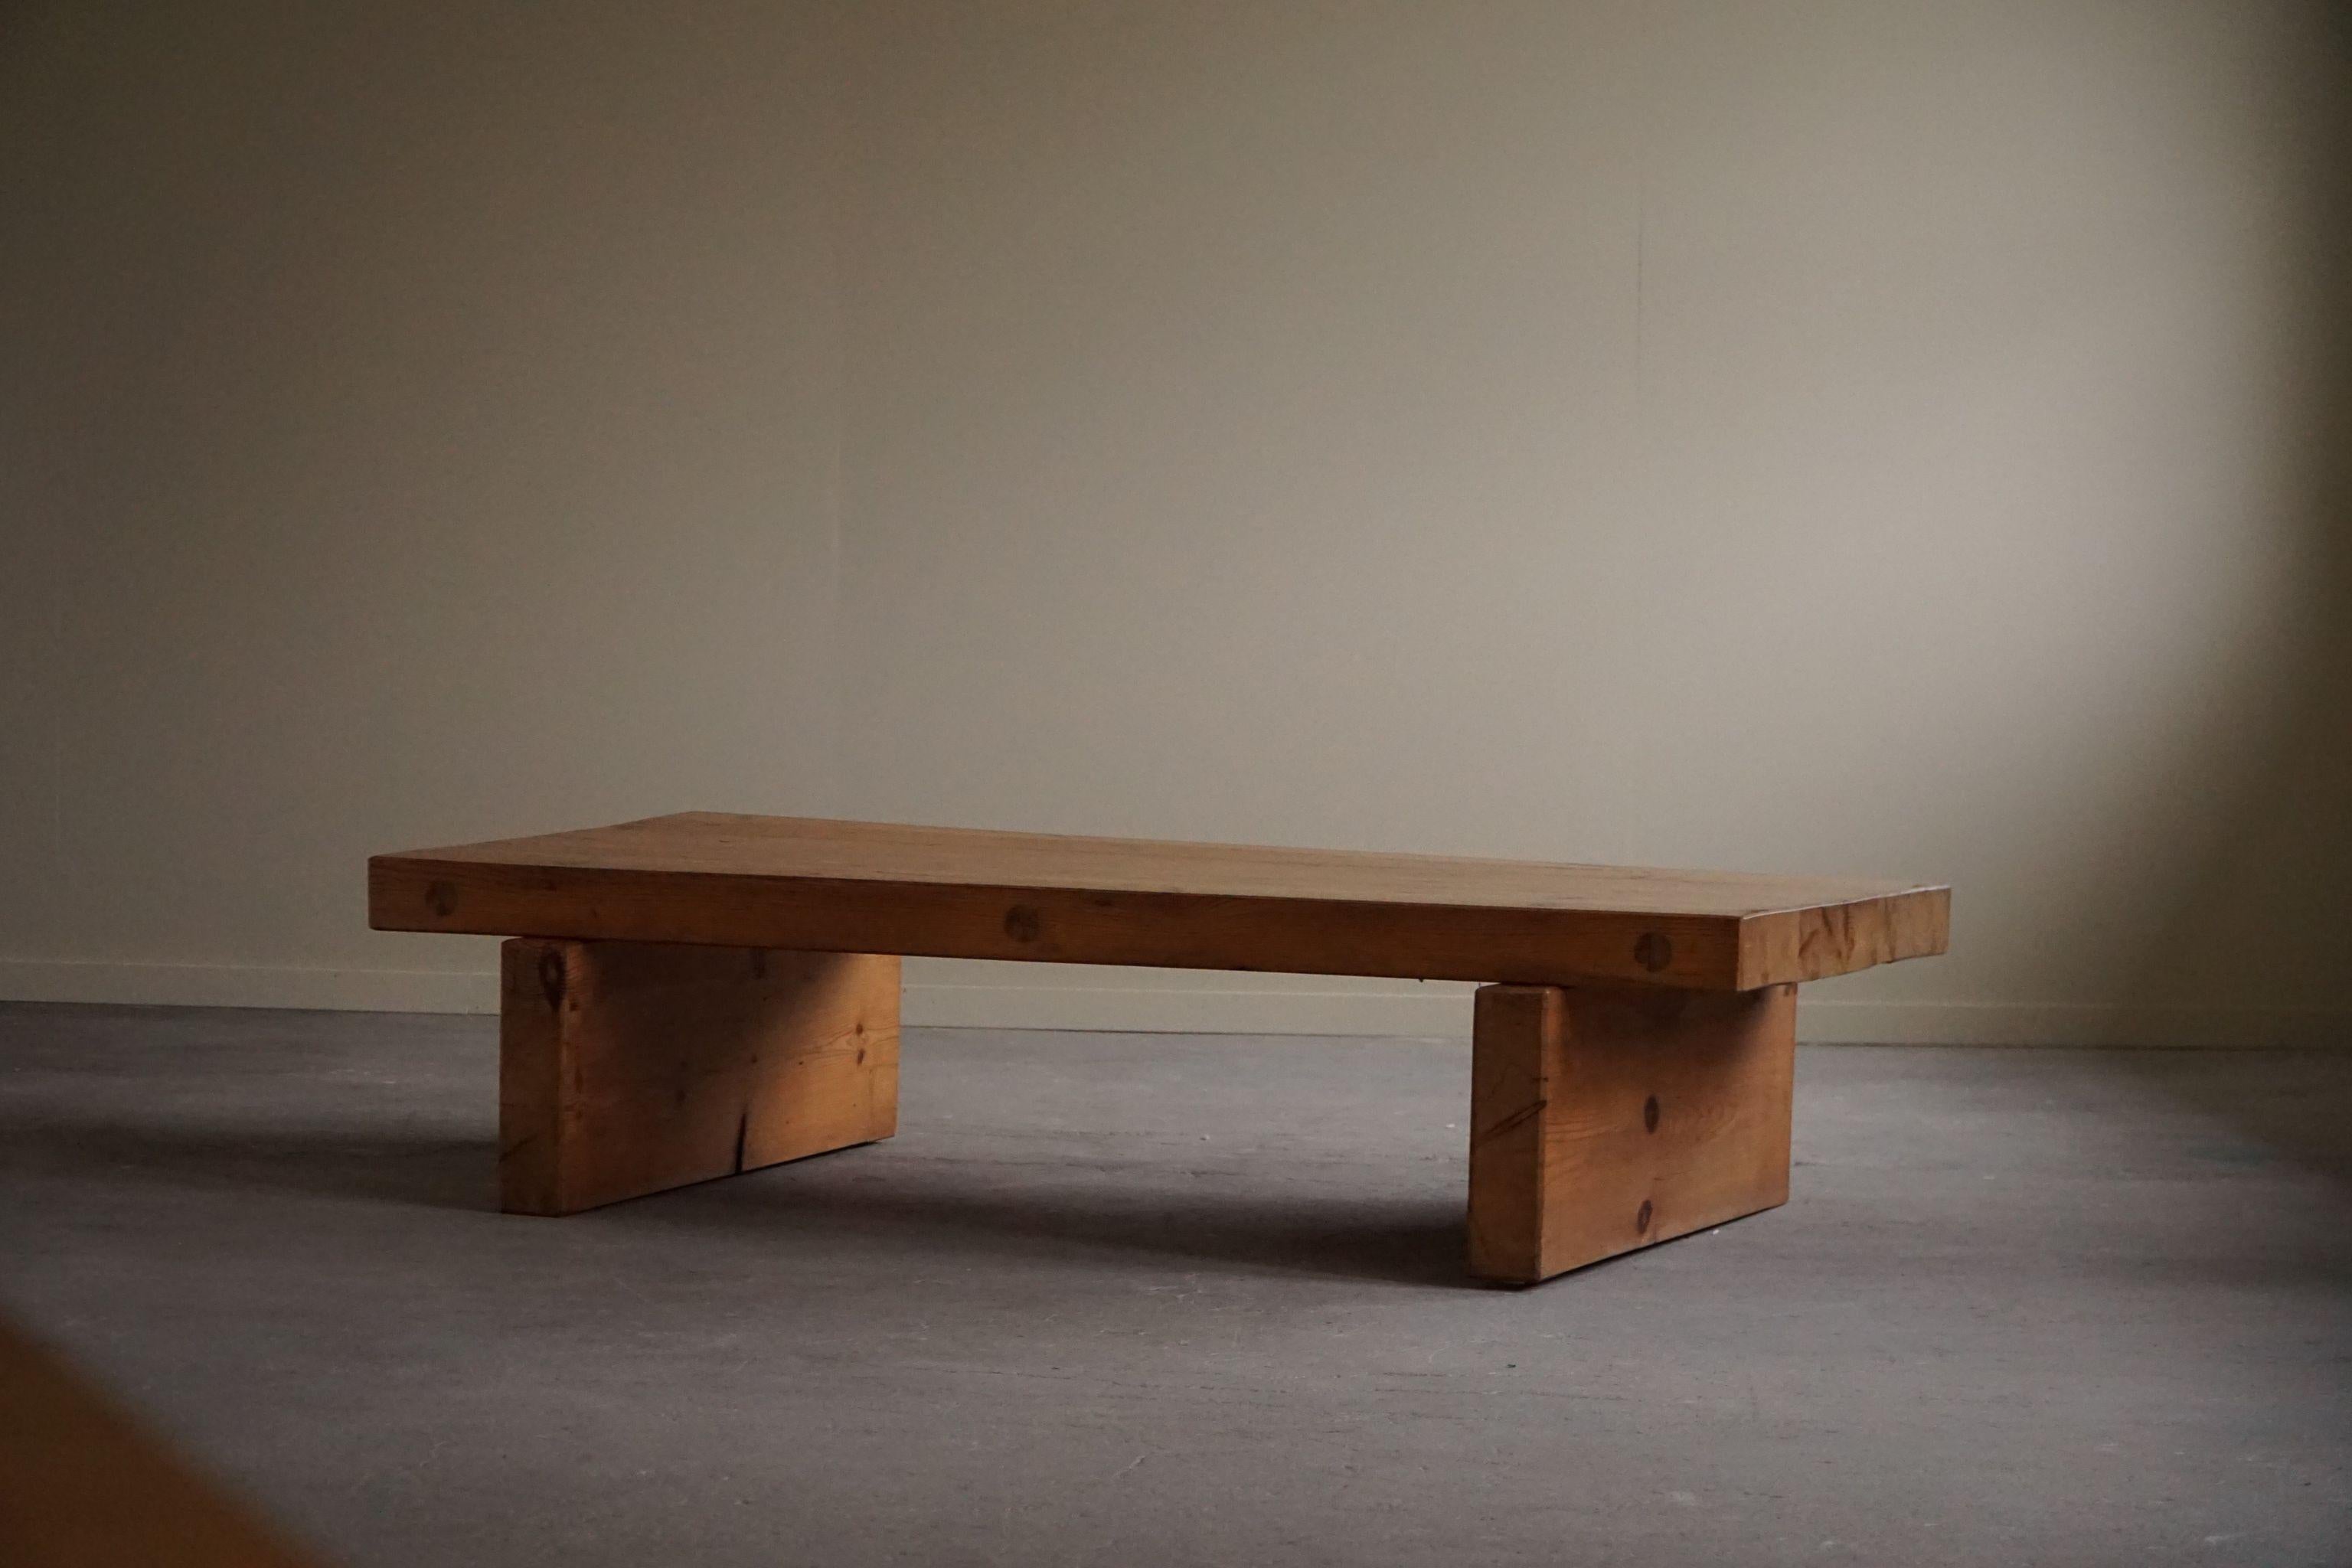 Swedish modern rectangular coffee table in solid pine. Made by Roland Wilhelmsson as part of hes own production made for Ågesta. Stamped and signed 1969. Great craftmanship and such nice details visible shown in this fine brutalist table.

This